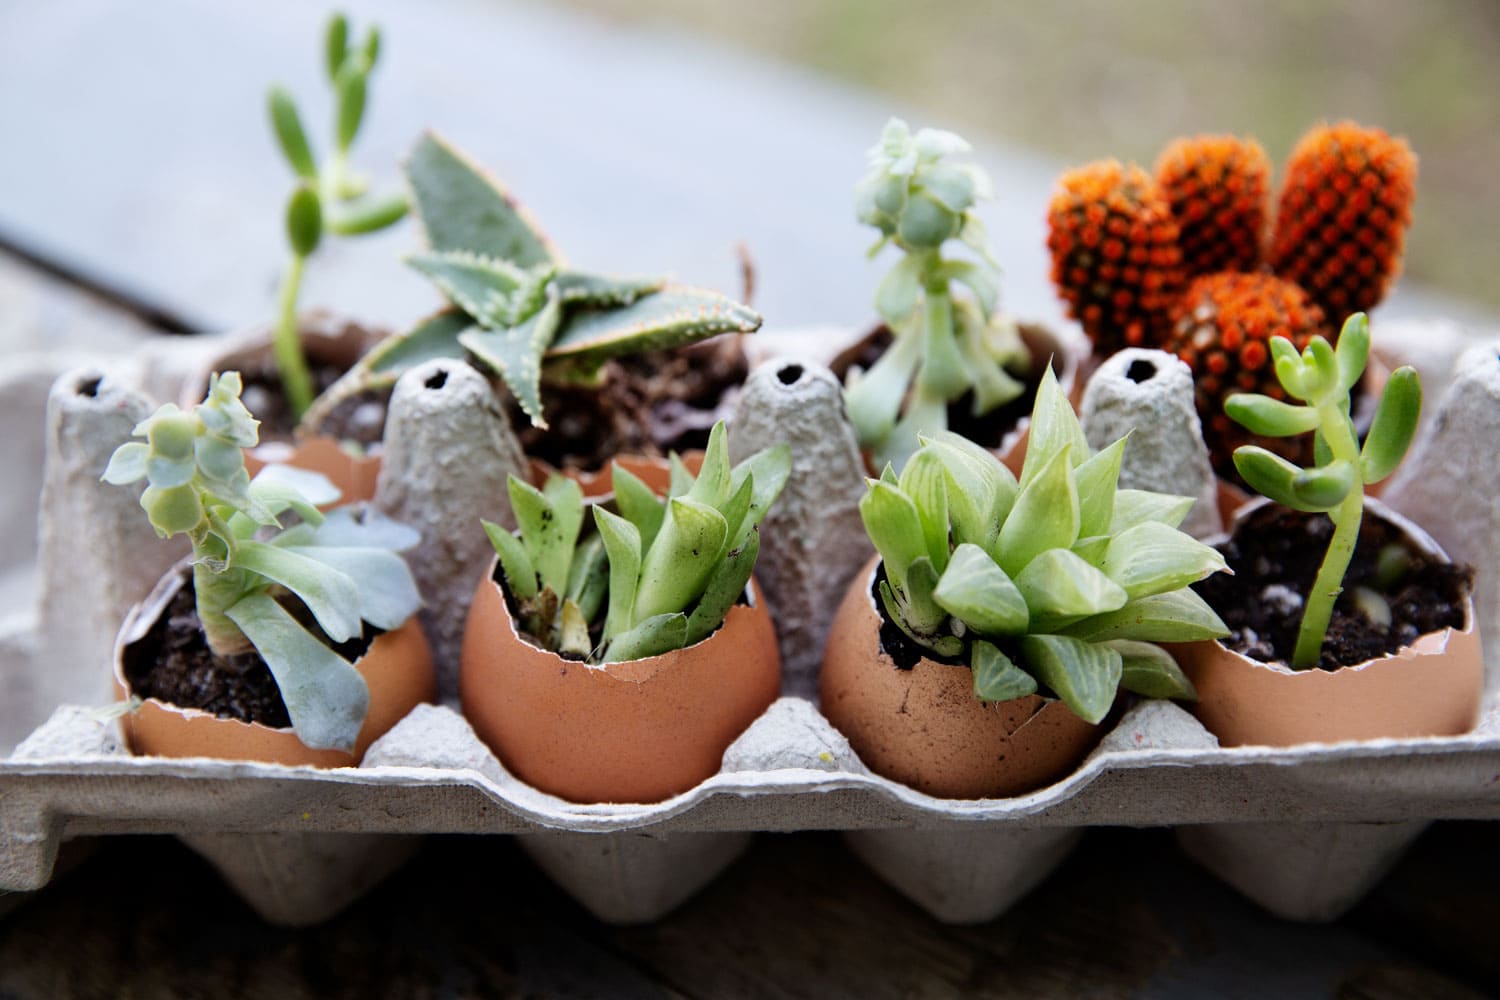 Succulent plants planted in eggshells and in an egg carton.